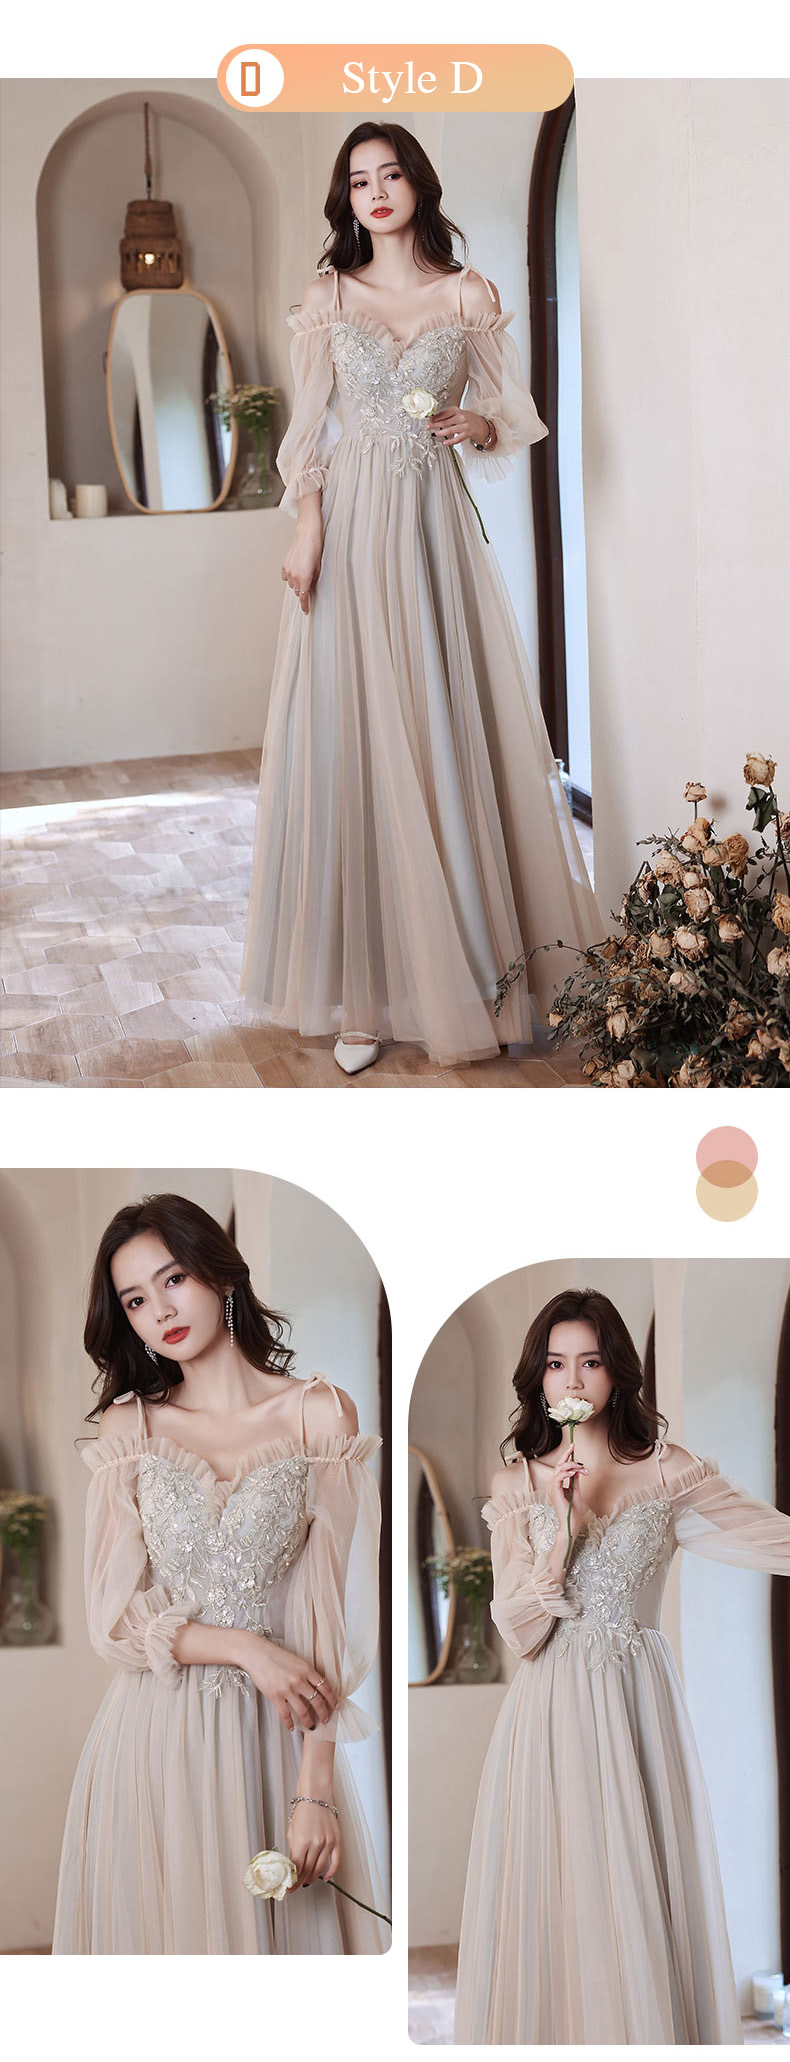 Multiway-Maxi-Bridesmaid-Dress-Wedding-Guest-Long-Formal-Outfit20.jpg